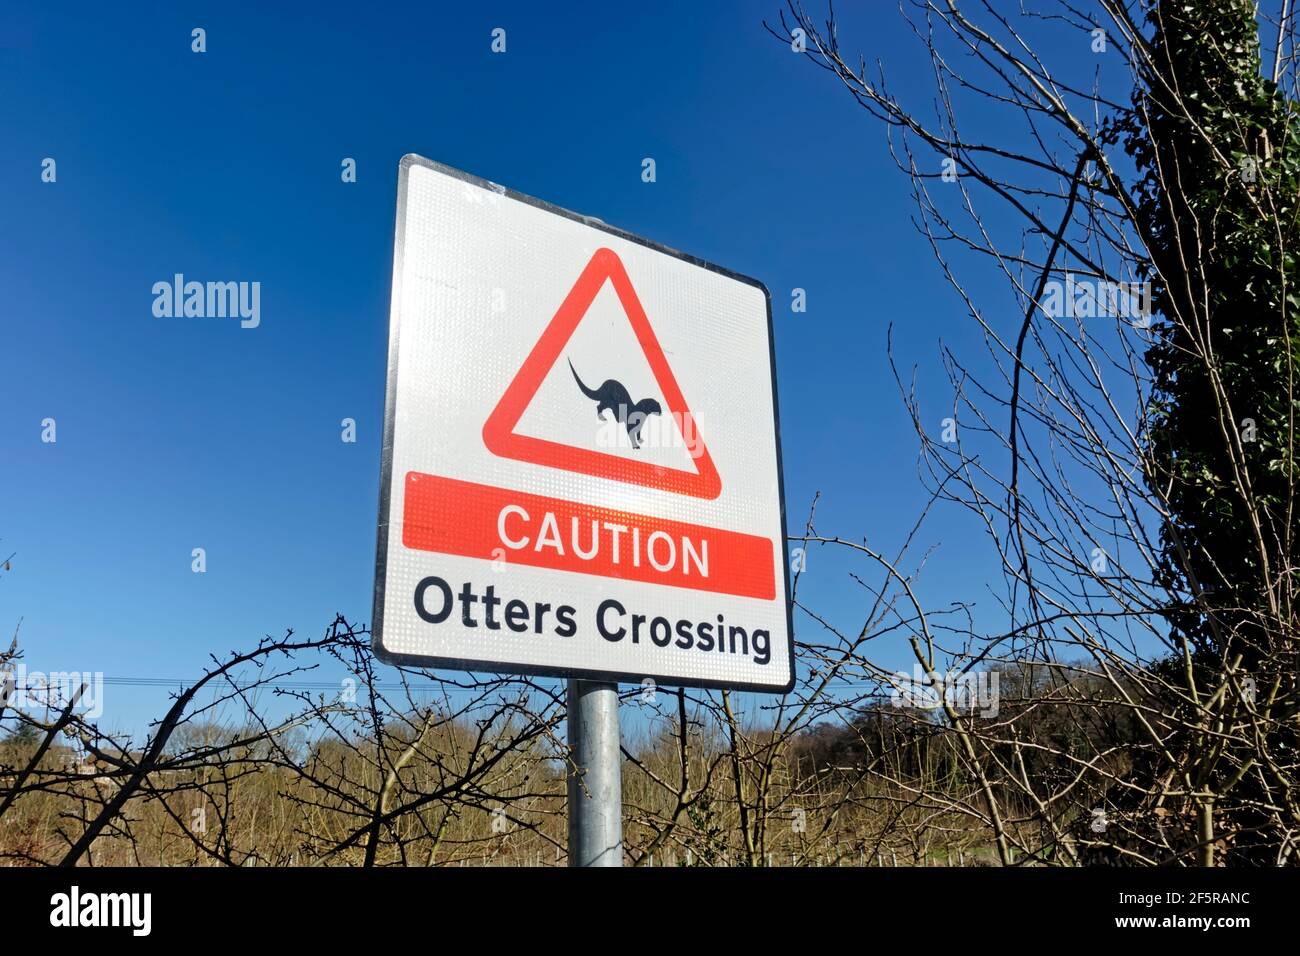 Warminster, Wiltshire, UK - February 28 2021: A caution Otters Crossing Sign at Smallbrook Meadows Nature Reserve in Warminster, Wiltshire, England Stock Photo